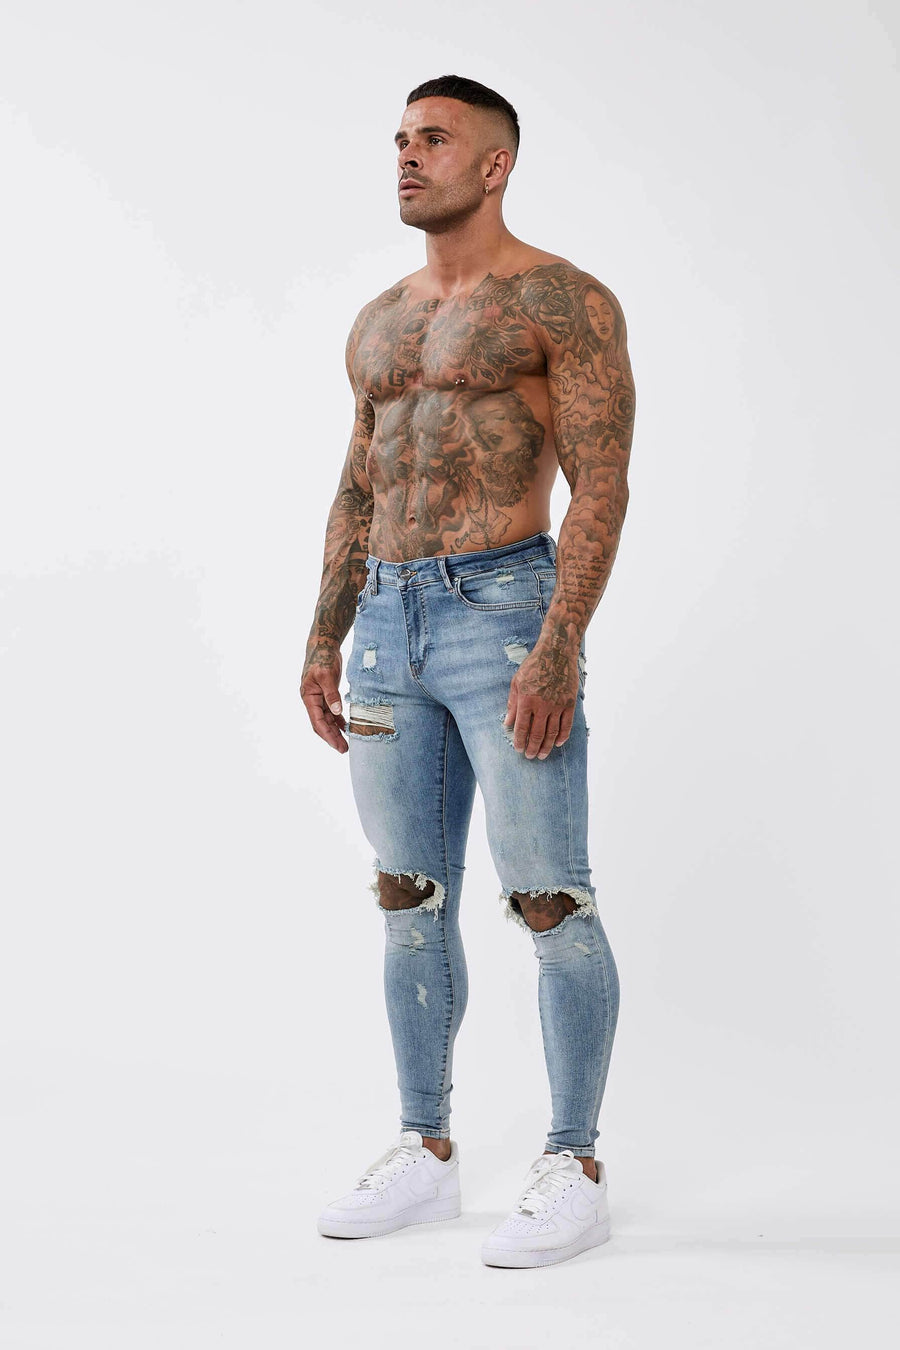 Legend London Jeans STRONG WASHED DARK BLUE SPRAY ON JEANS - RIPPED & REPAIRED